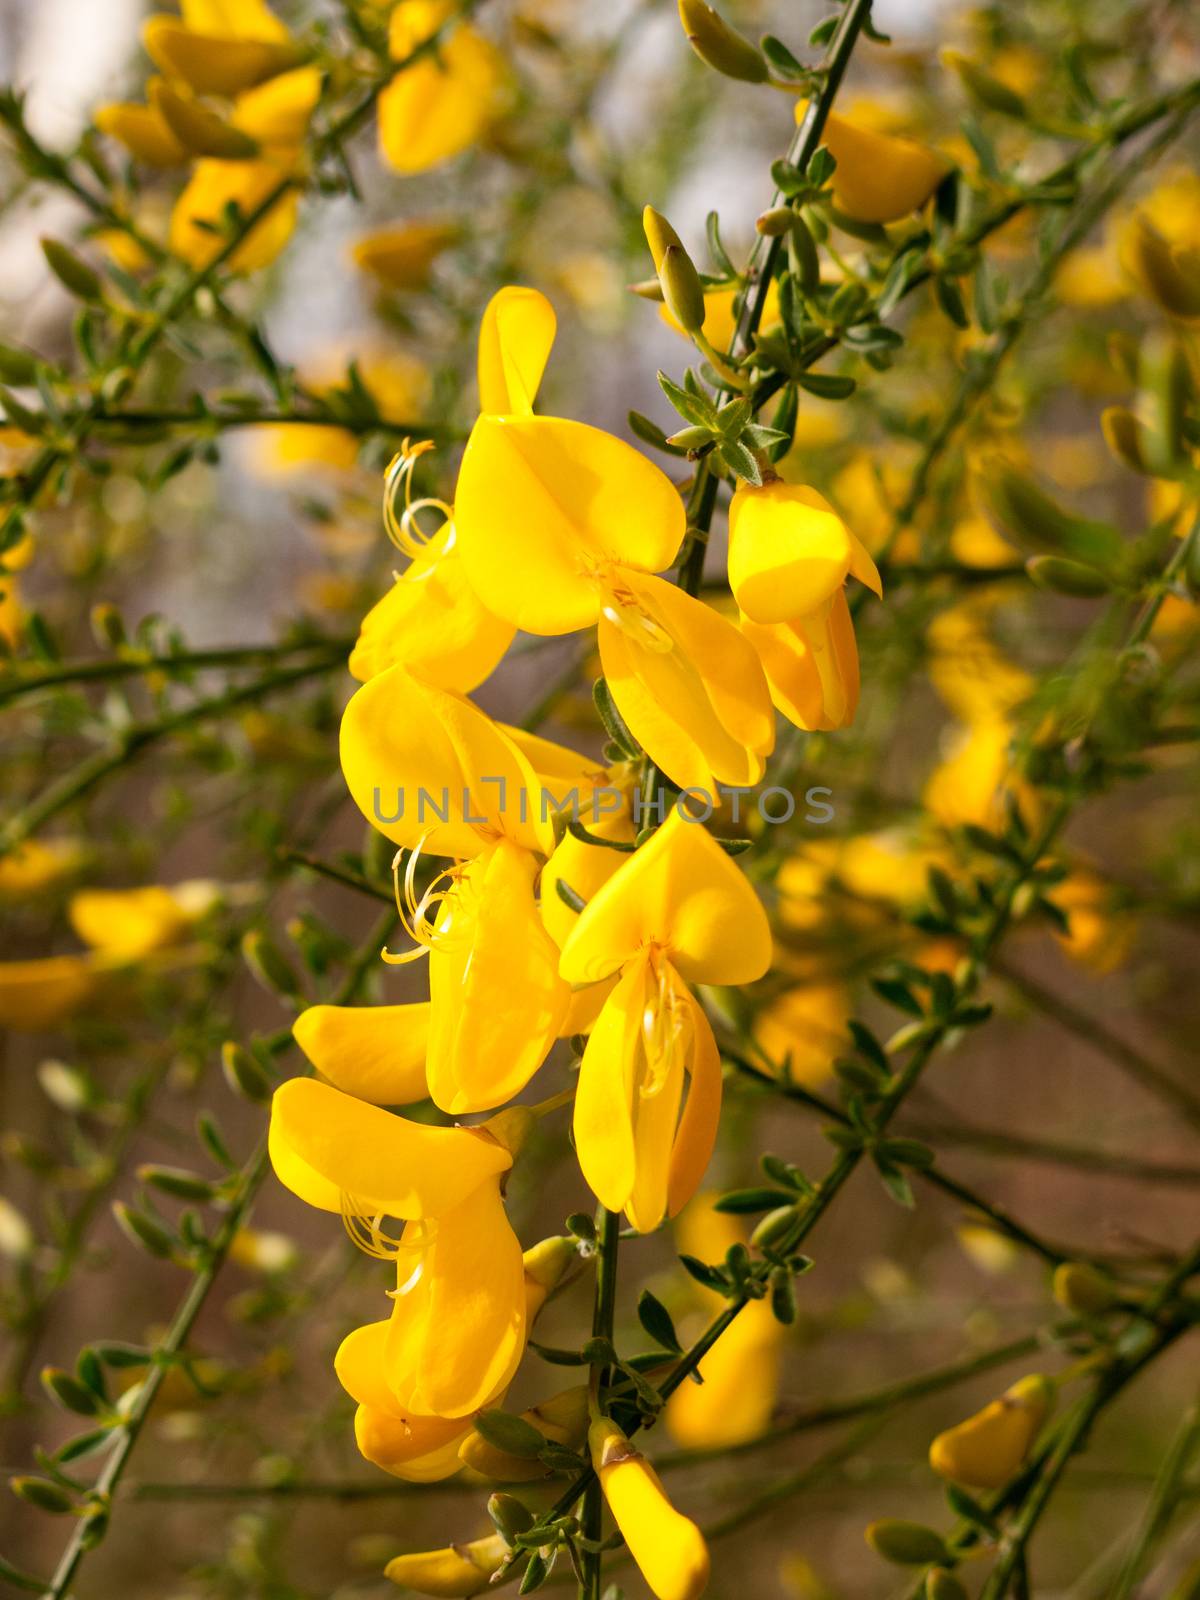 Stunning Dangling Golden Gorse Flower Petals And Heads in the Bright Light of Spring and Sun with Green Branches Behind Bokeh Stunning With Life and Love and Tranquility